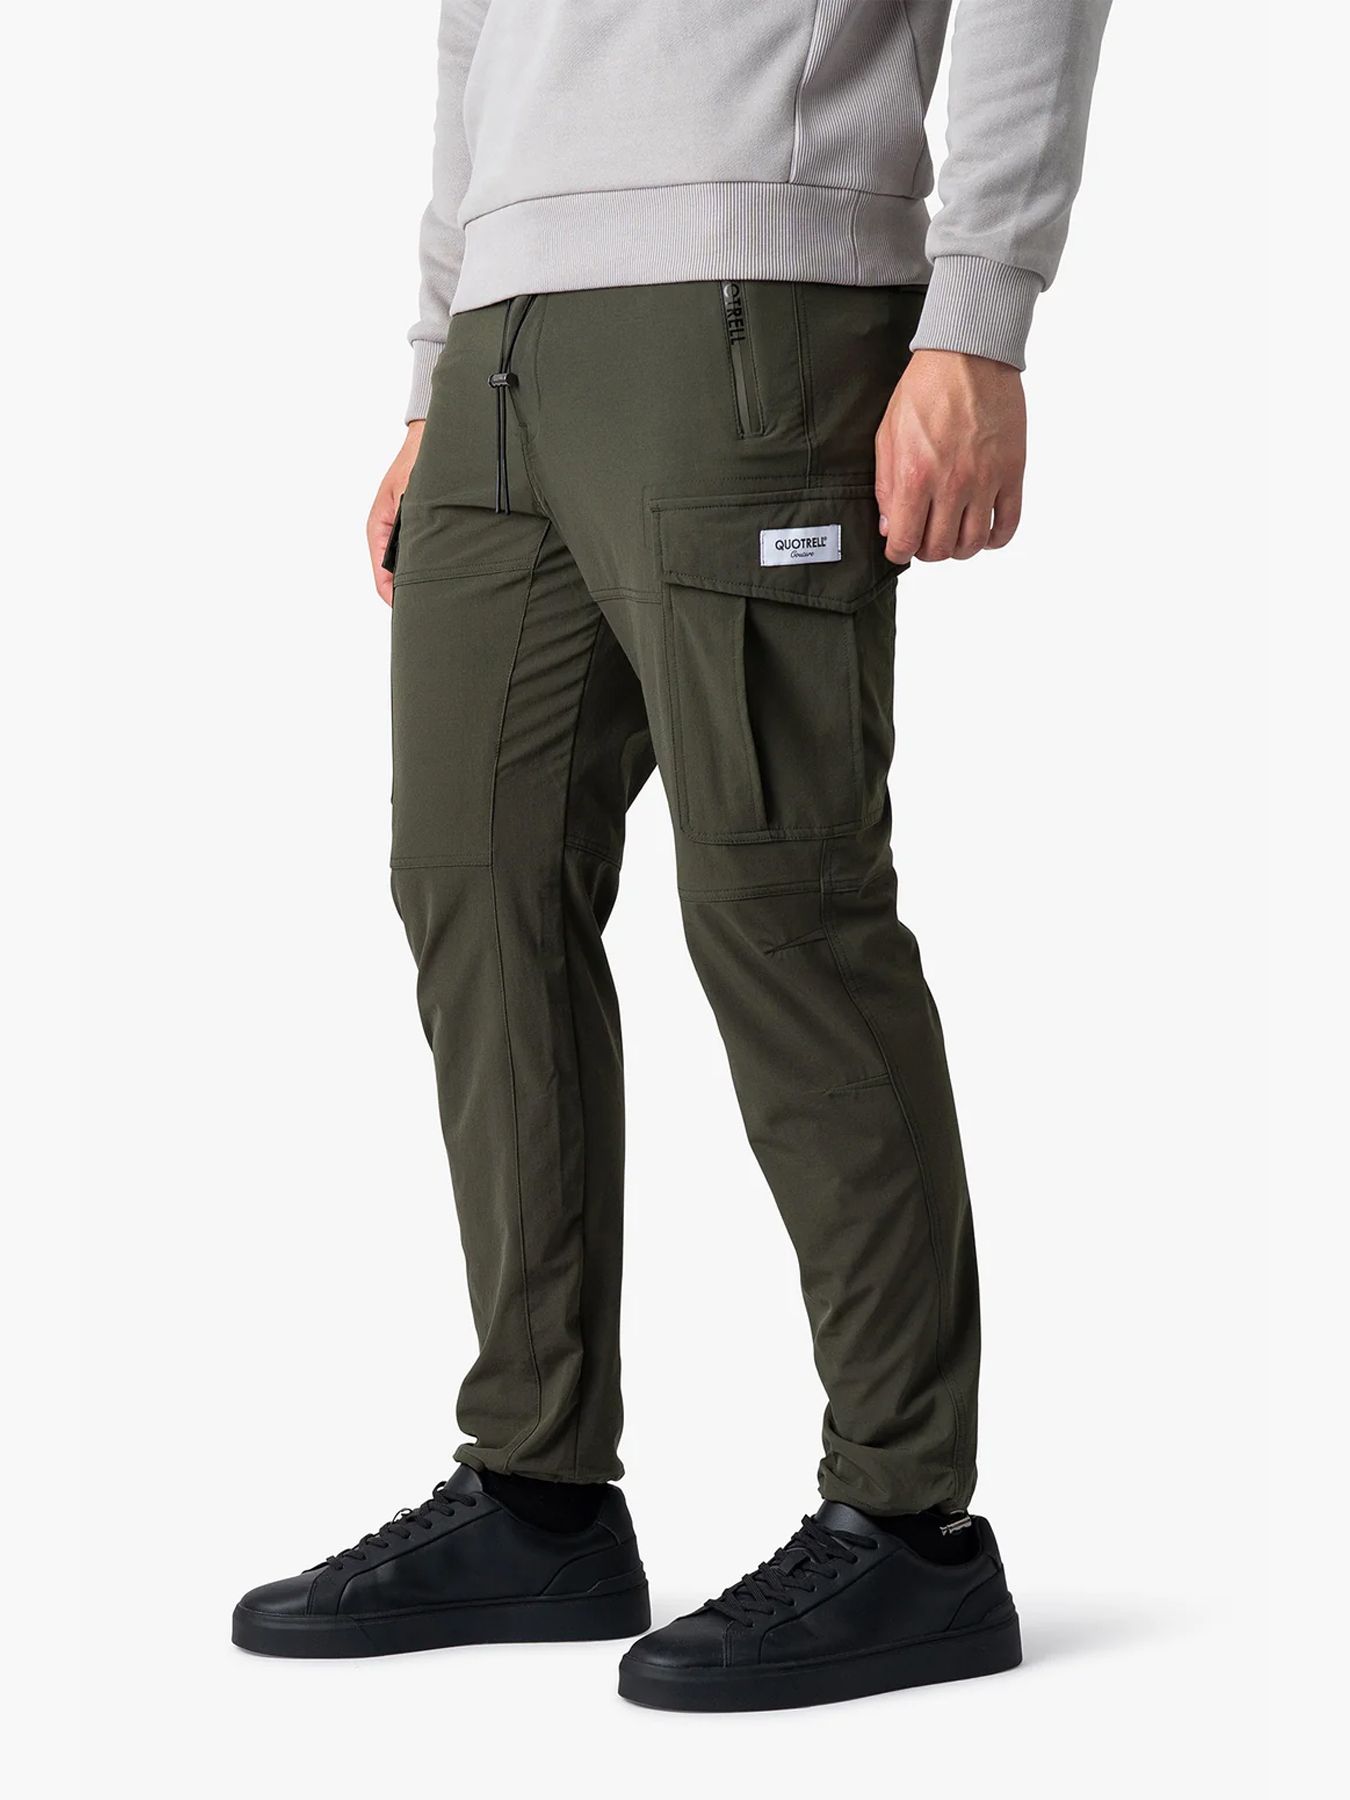 Quotrell Seattle cargo pants Army Green 00104039-614